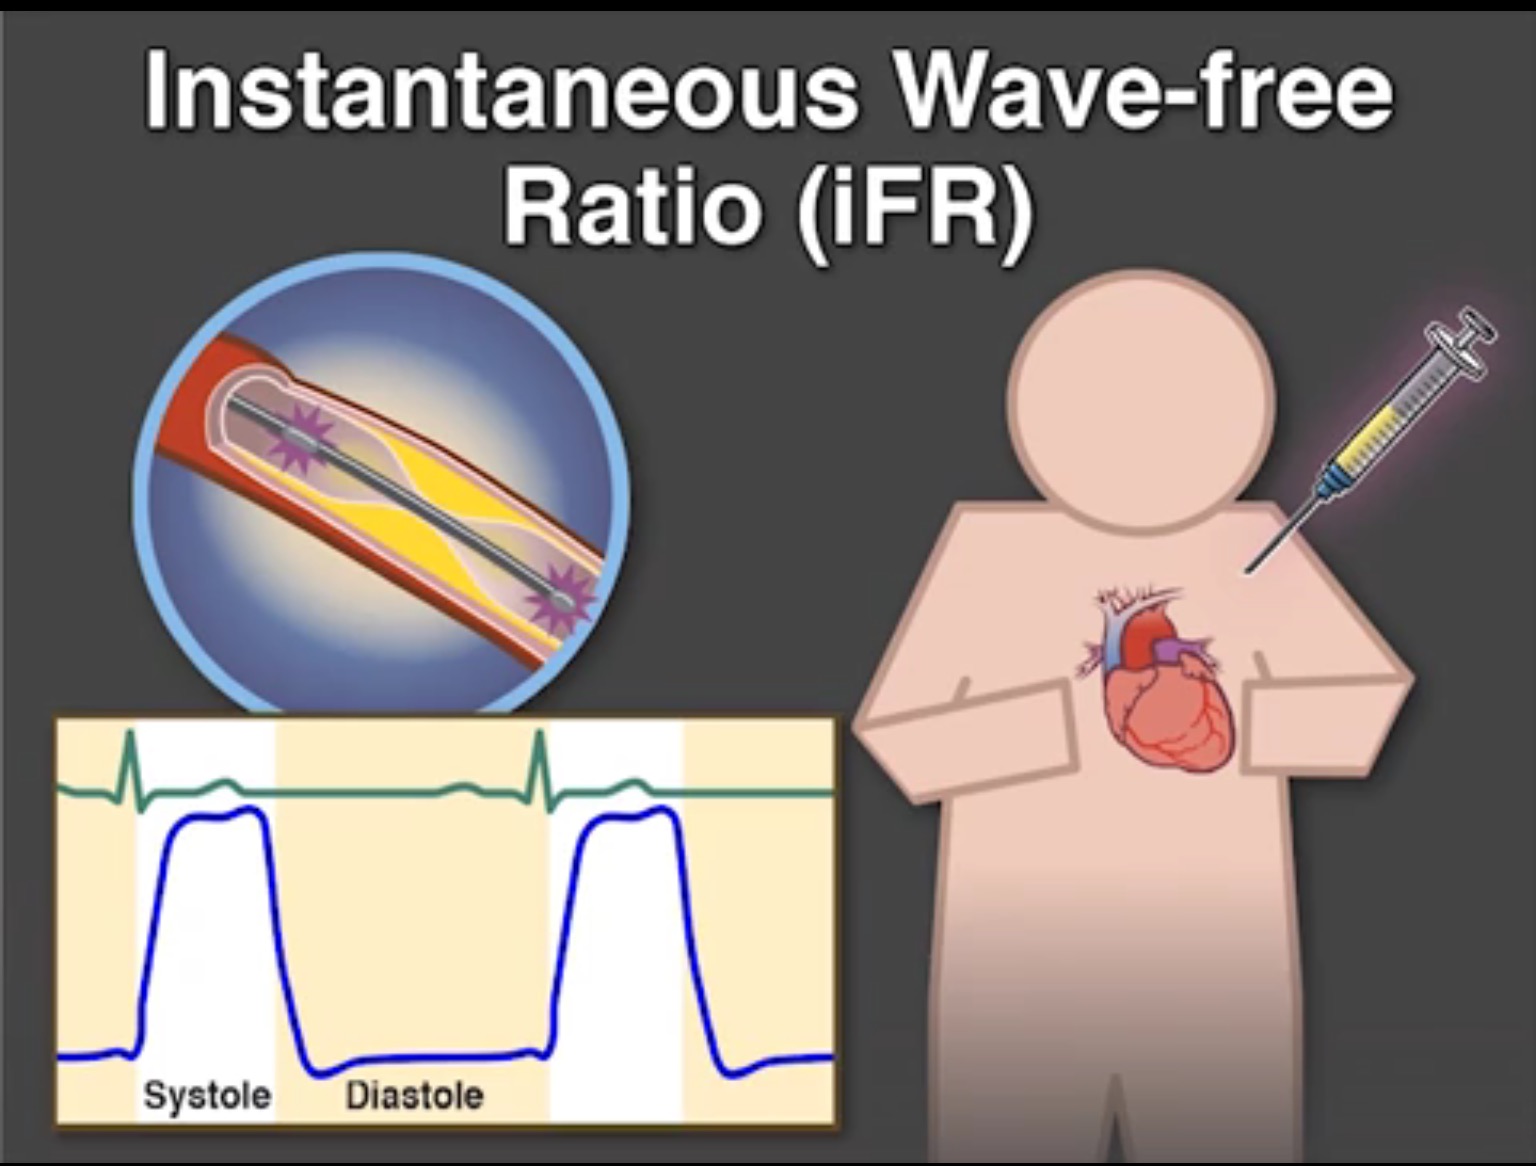 INSTANTANEOUS WAVE FREE RATIO IS CALCULATED DURING DIASTOLE WITHOUT NEED FOR HYPERAEMIA 